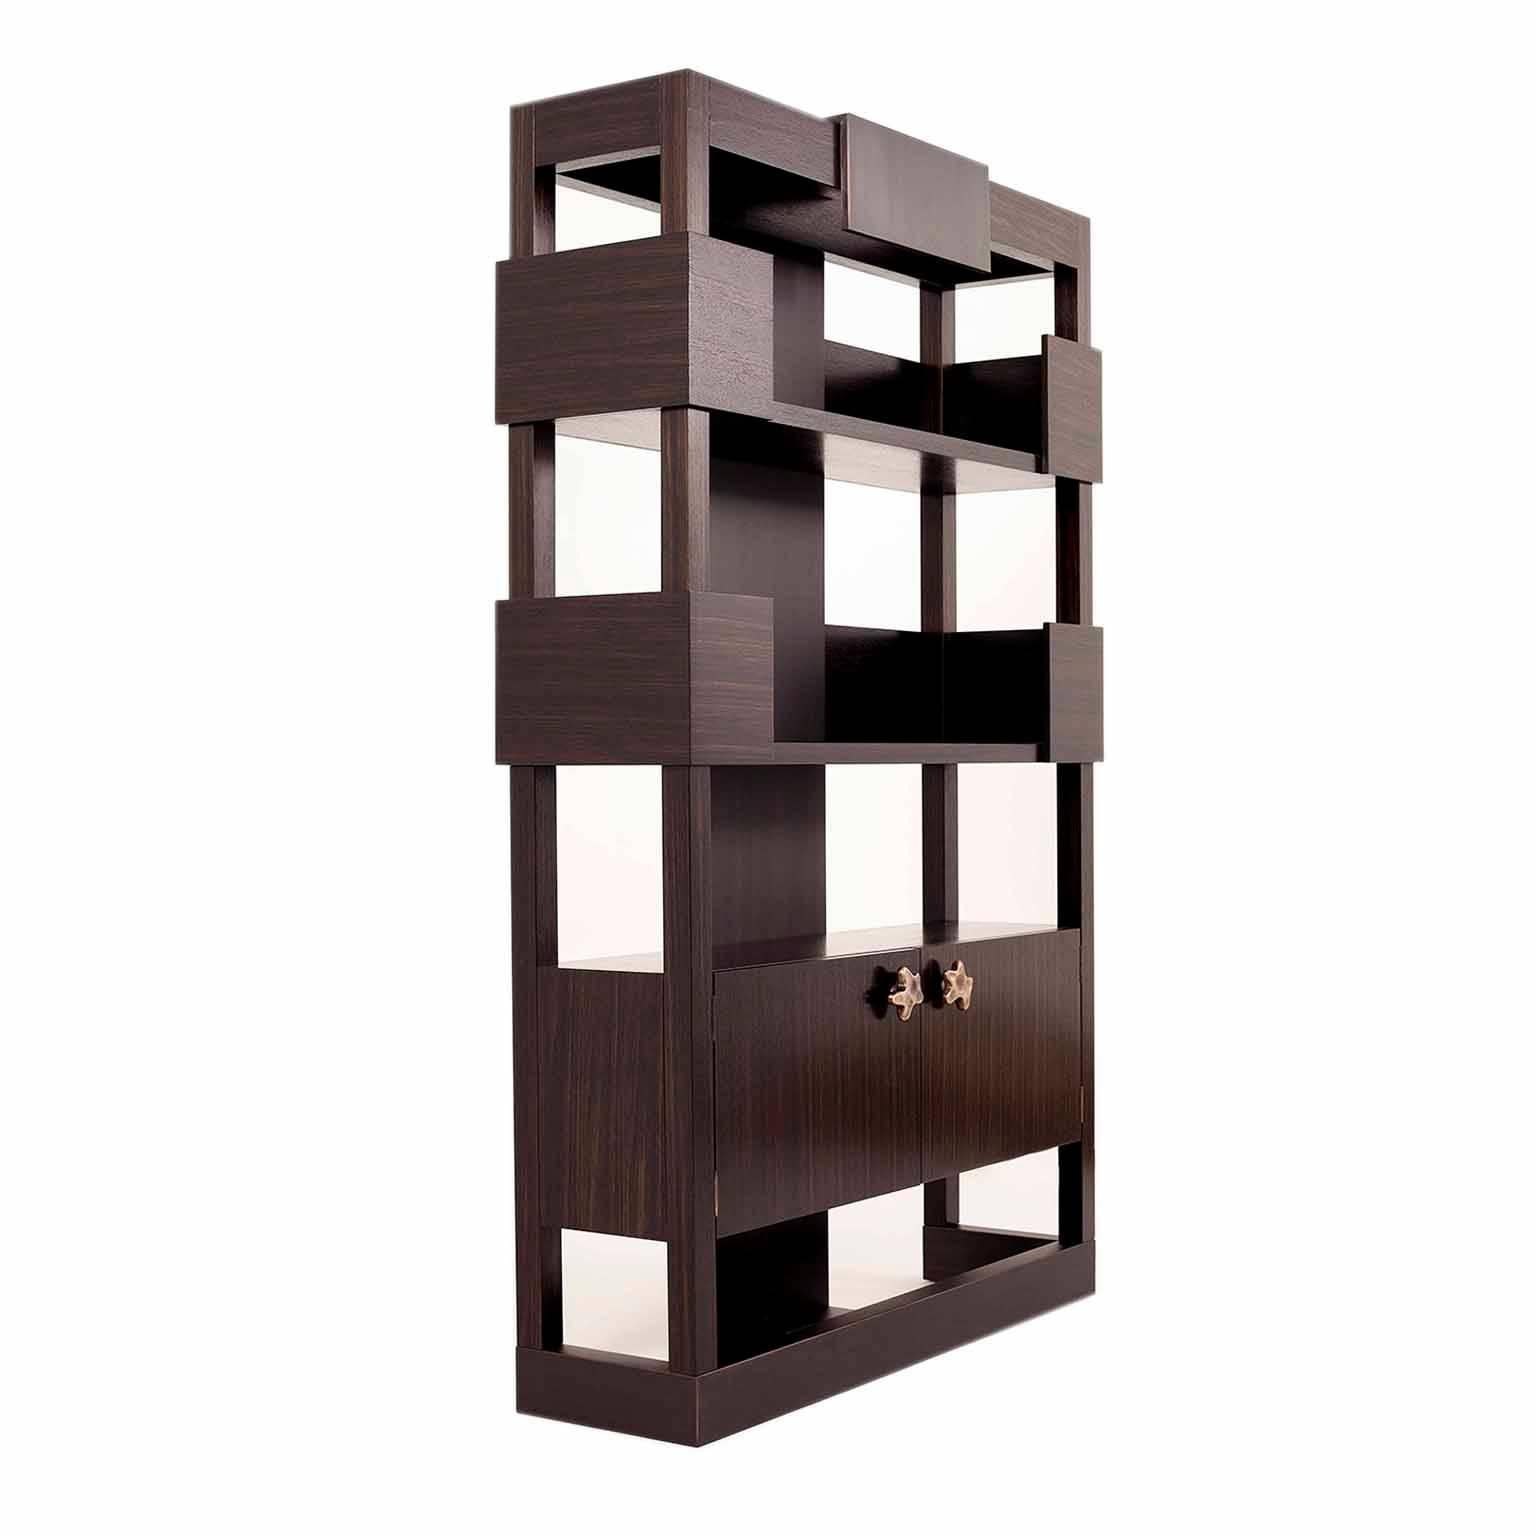 The strong geometry of this shelving unit replicates that of a Roman fort, creating a strong presence in any room, featuring a contrast in materials, textures and tones. The solid cast bronze have been specifically molded for this piece. This item